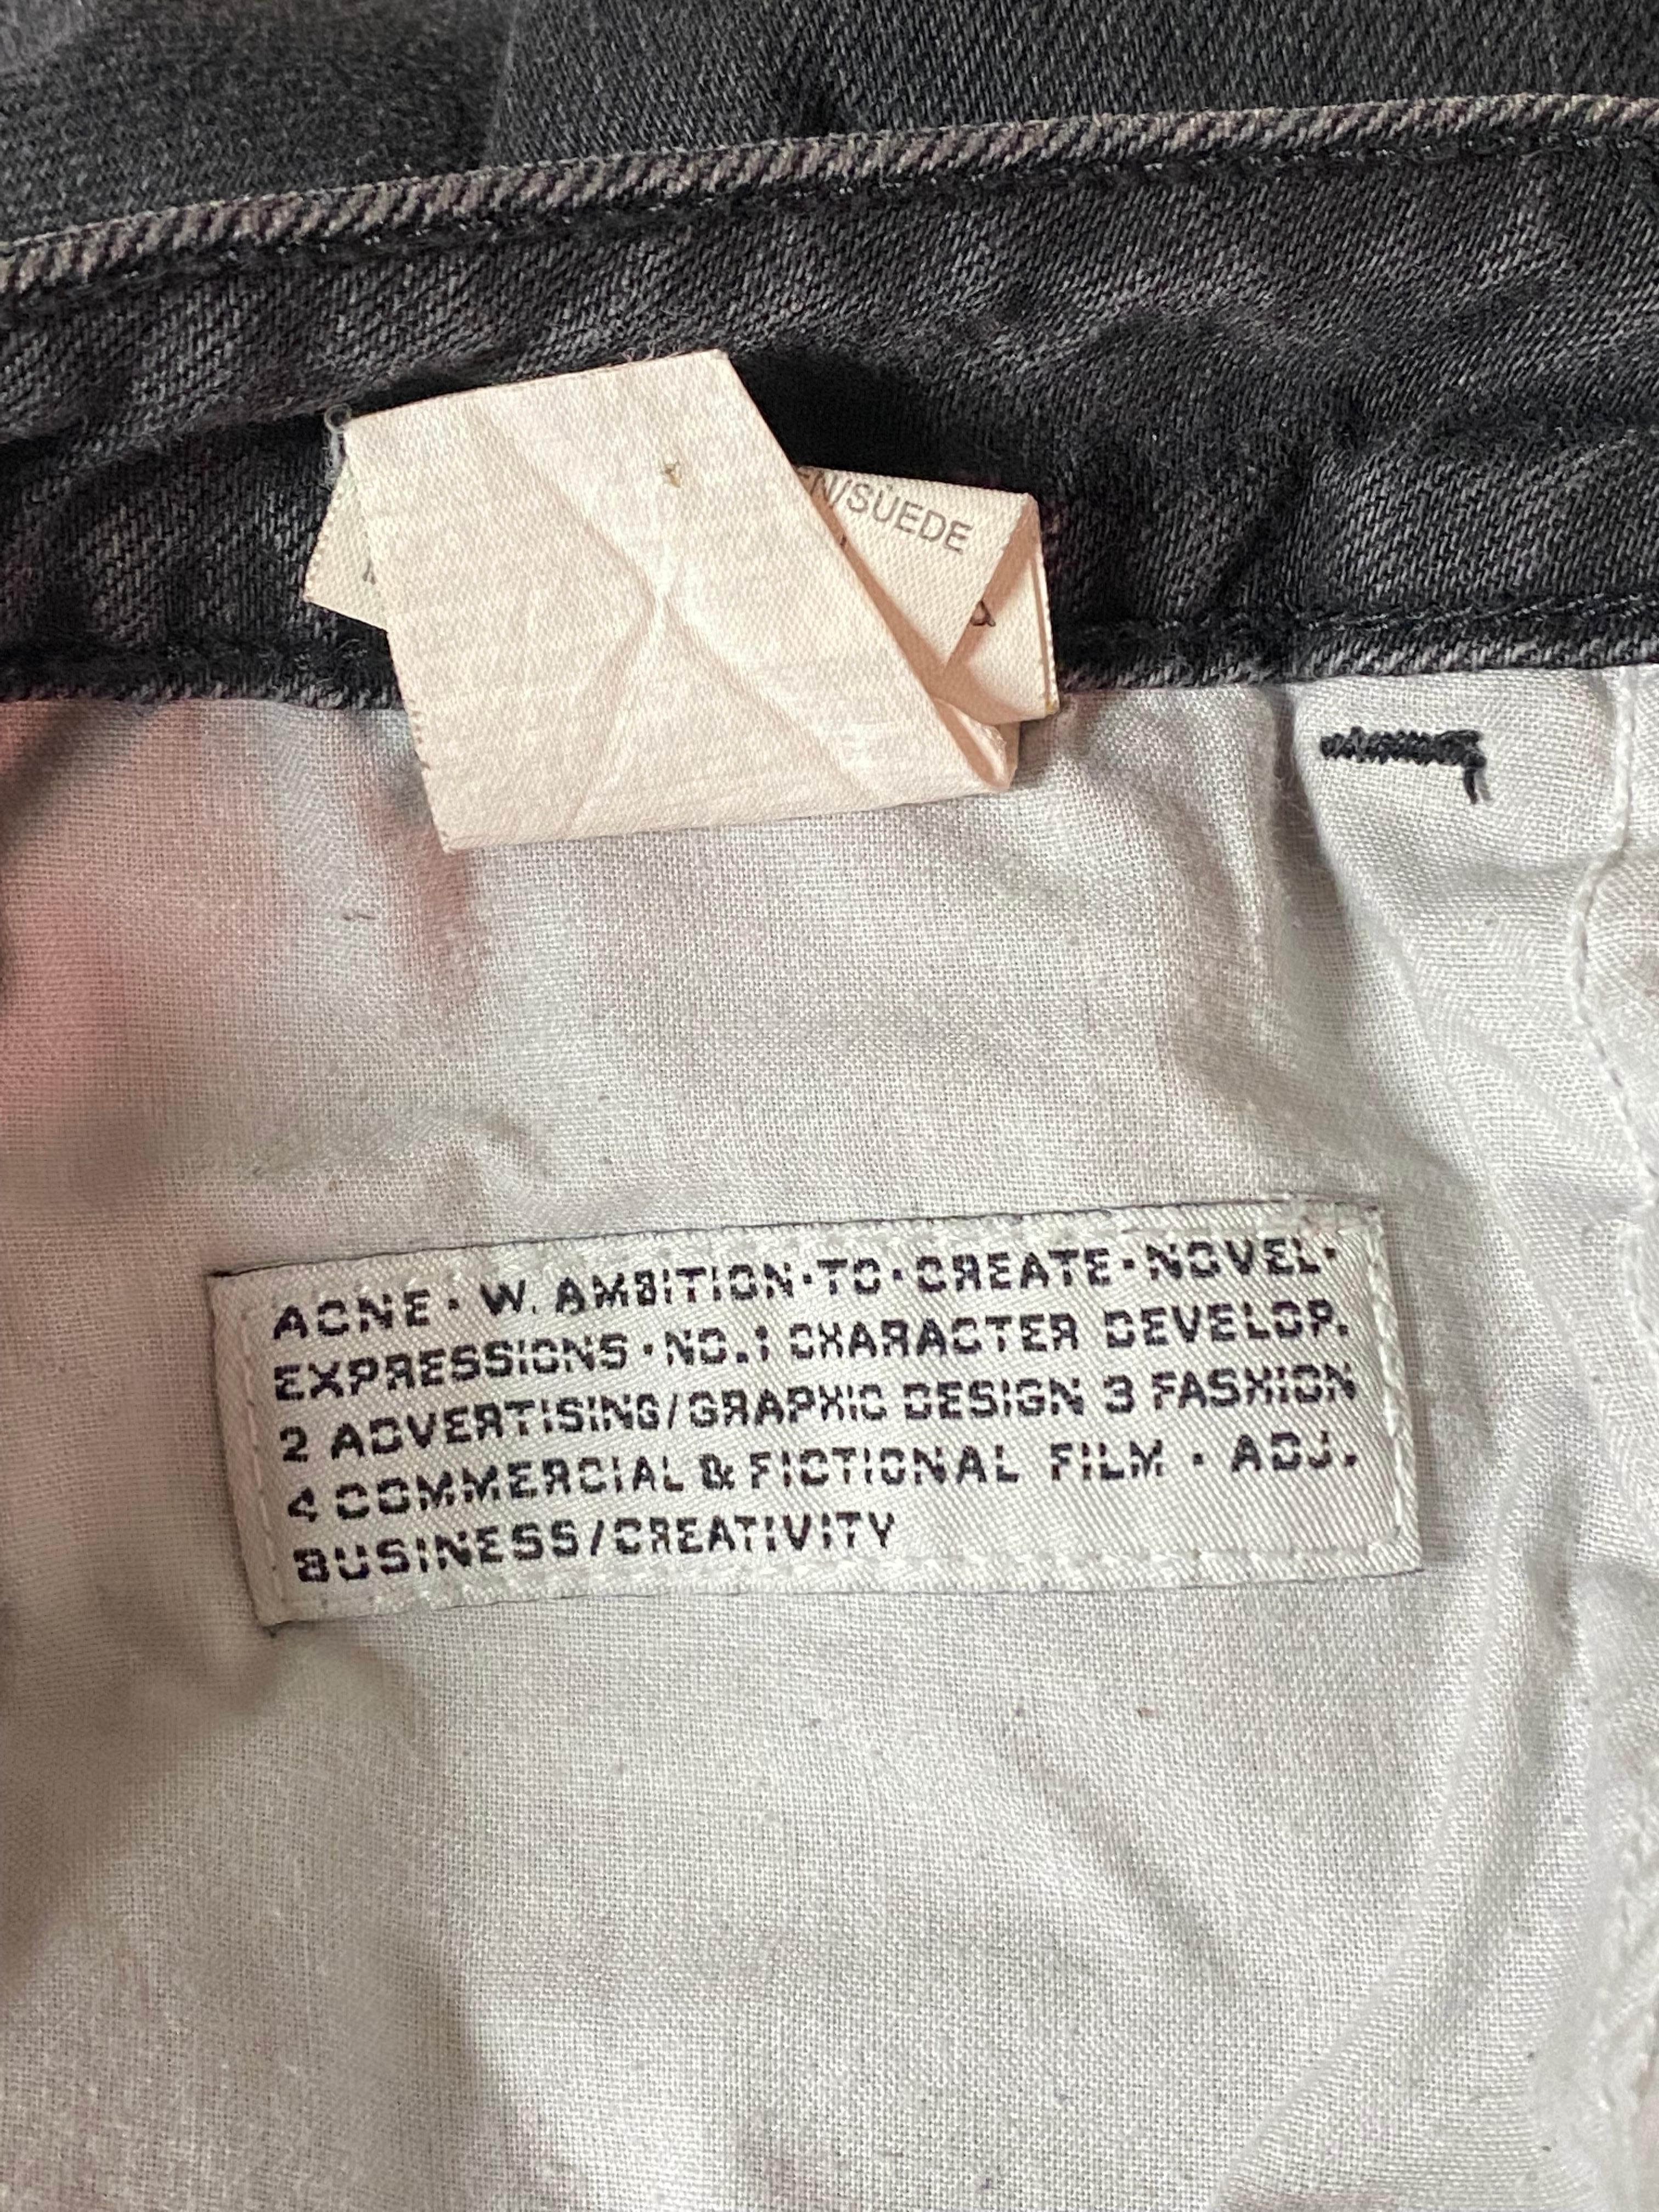 Acne Jeans Grey Skinny Denim Pants, Size 29/ 34 In Excellent Condition For Sale In Beverly Hills, CA